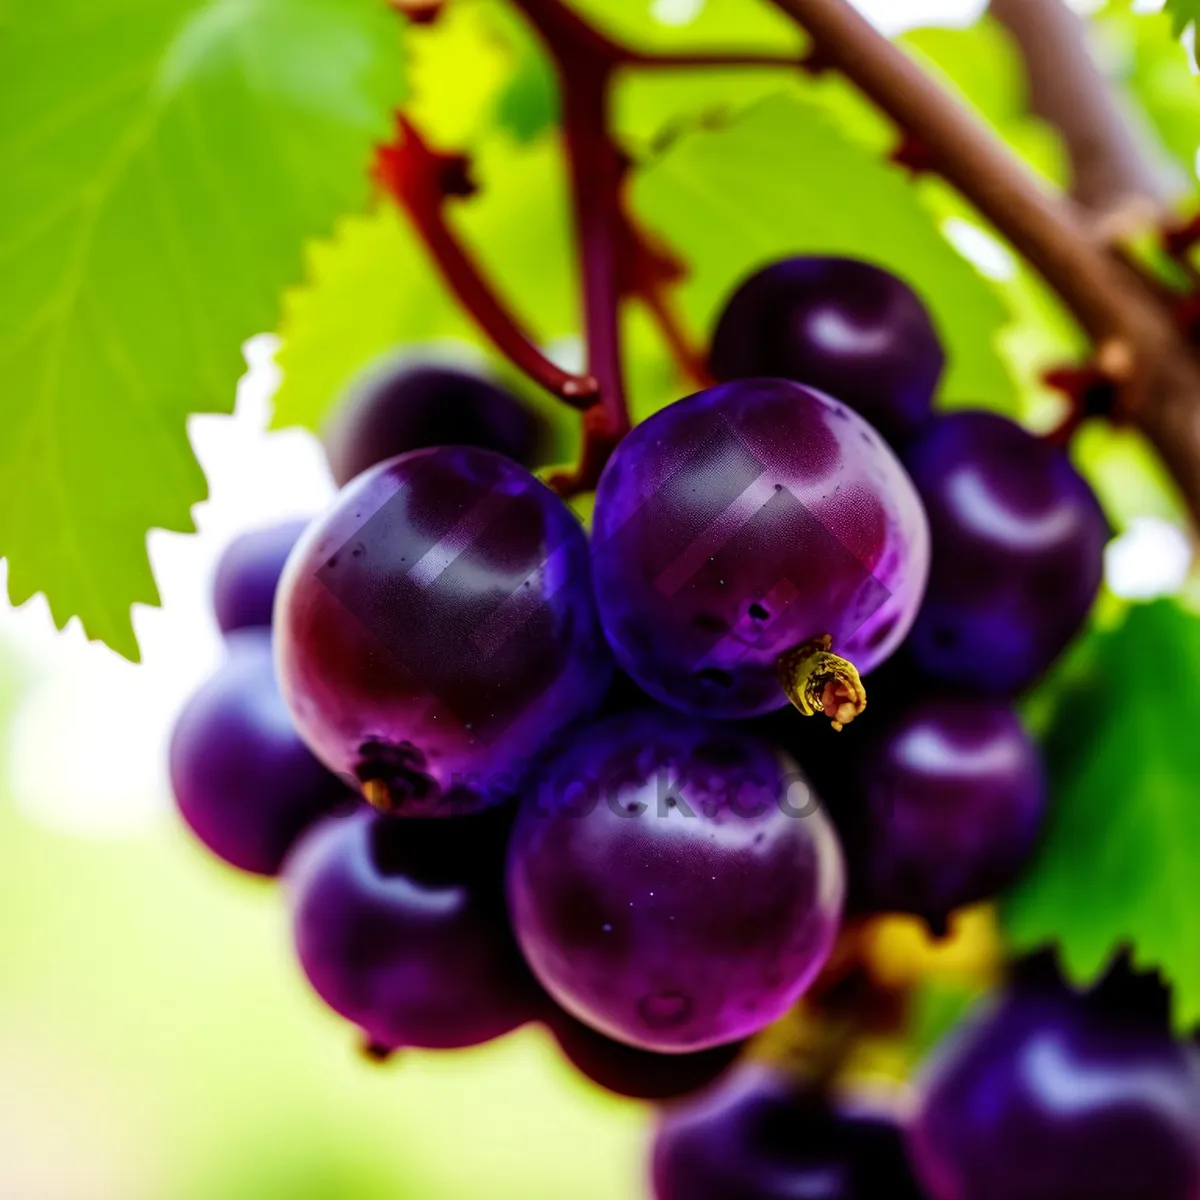 Picture of Refreshing Purple Grape Cluster - Bursting with Juicy Sweetness